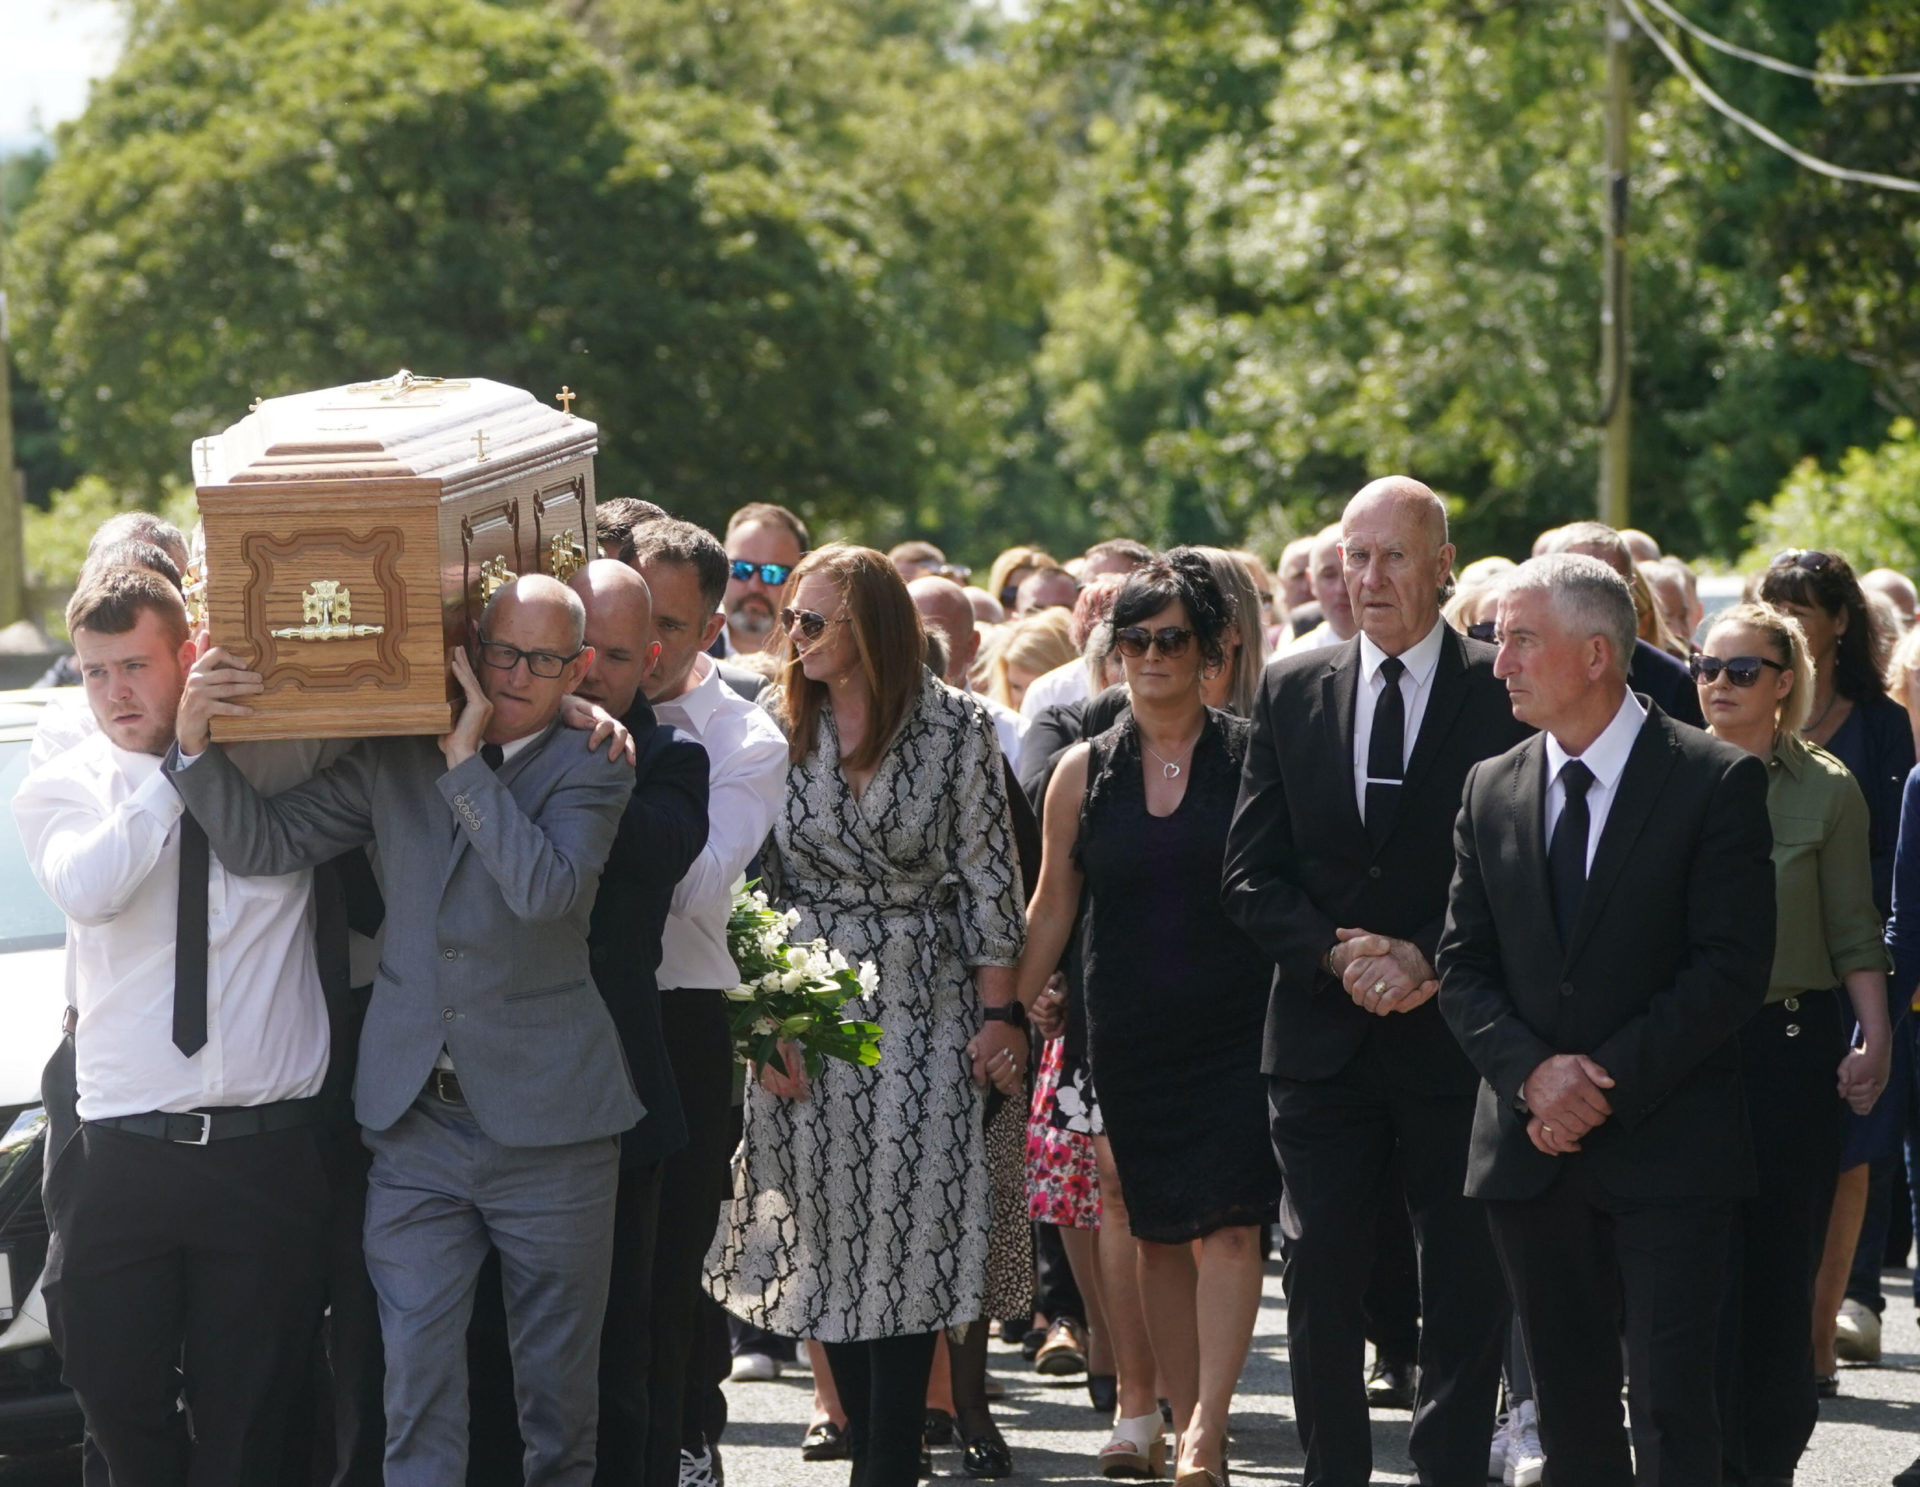 Family members and mourners follow as the coffin of Brendan Wall is carried from the Church of St Brigid in Grangegeeth, Co. Meath